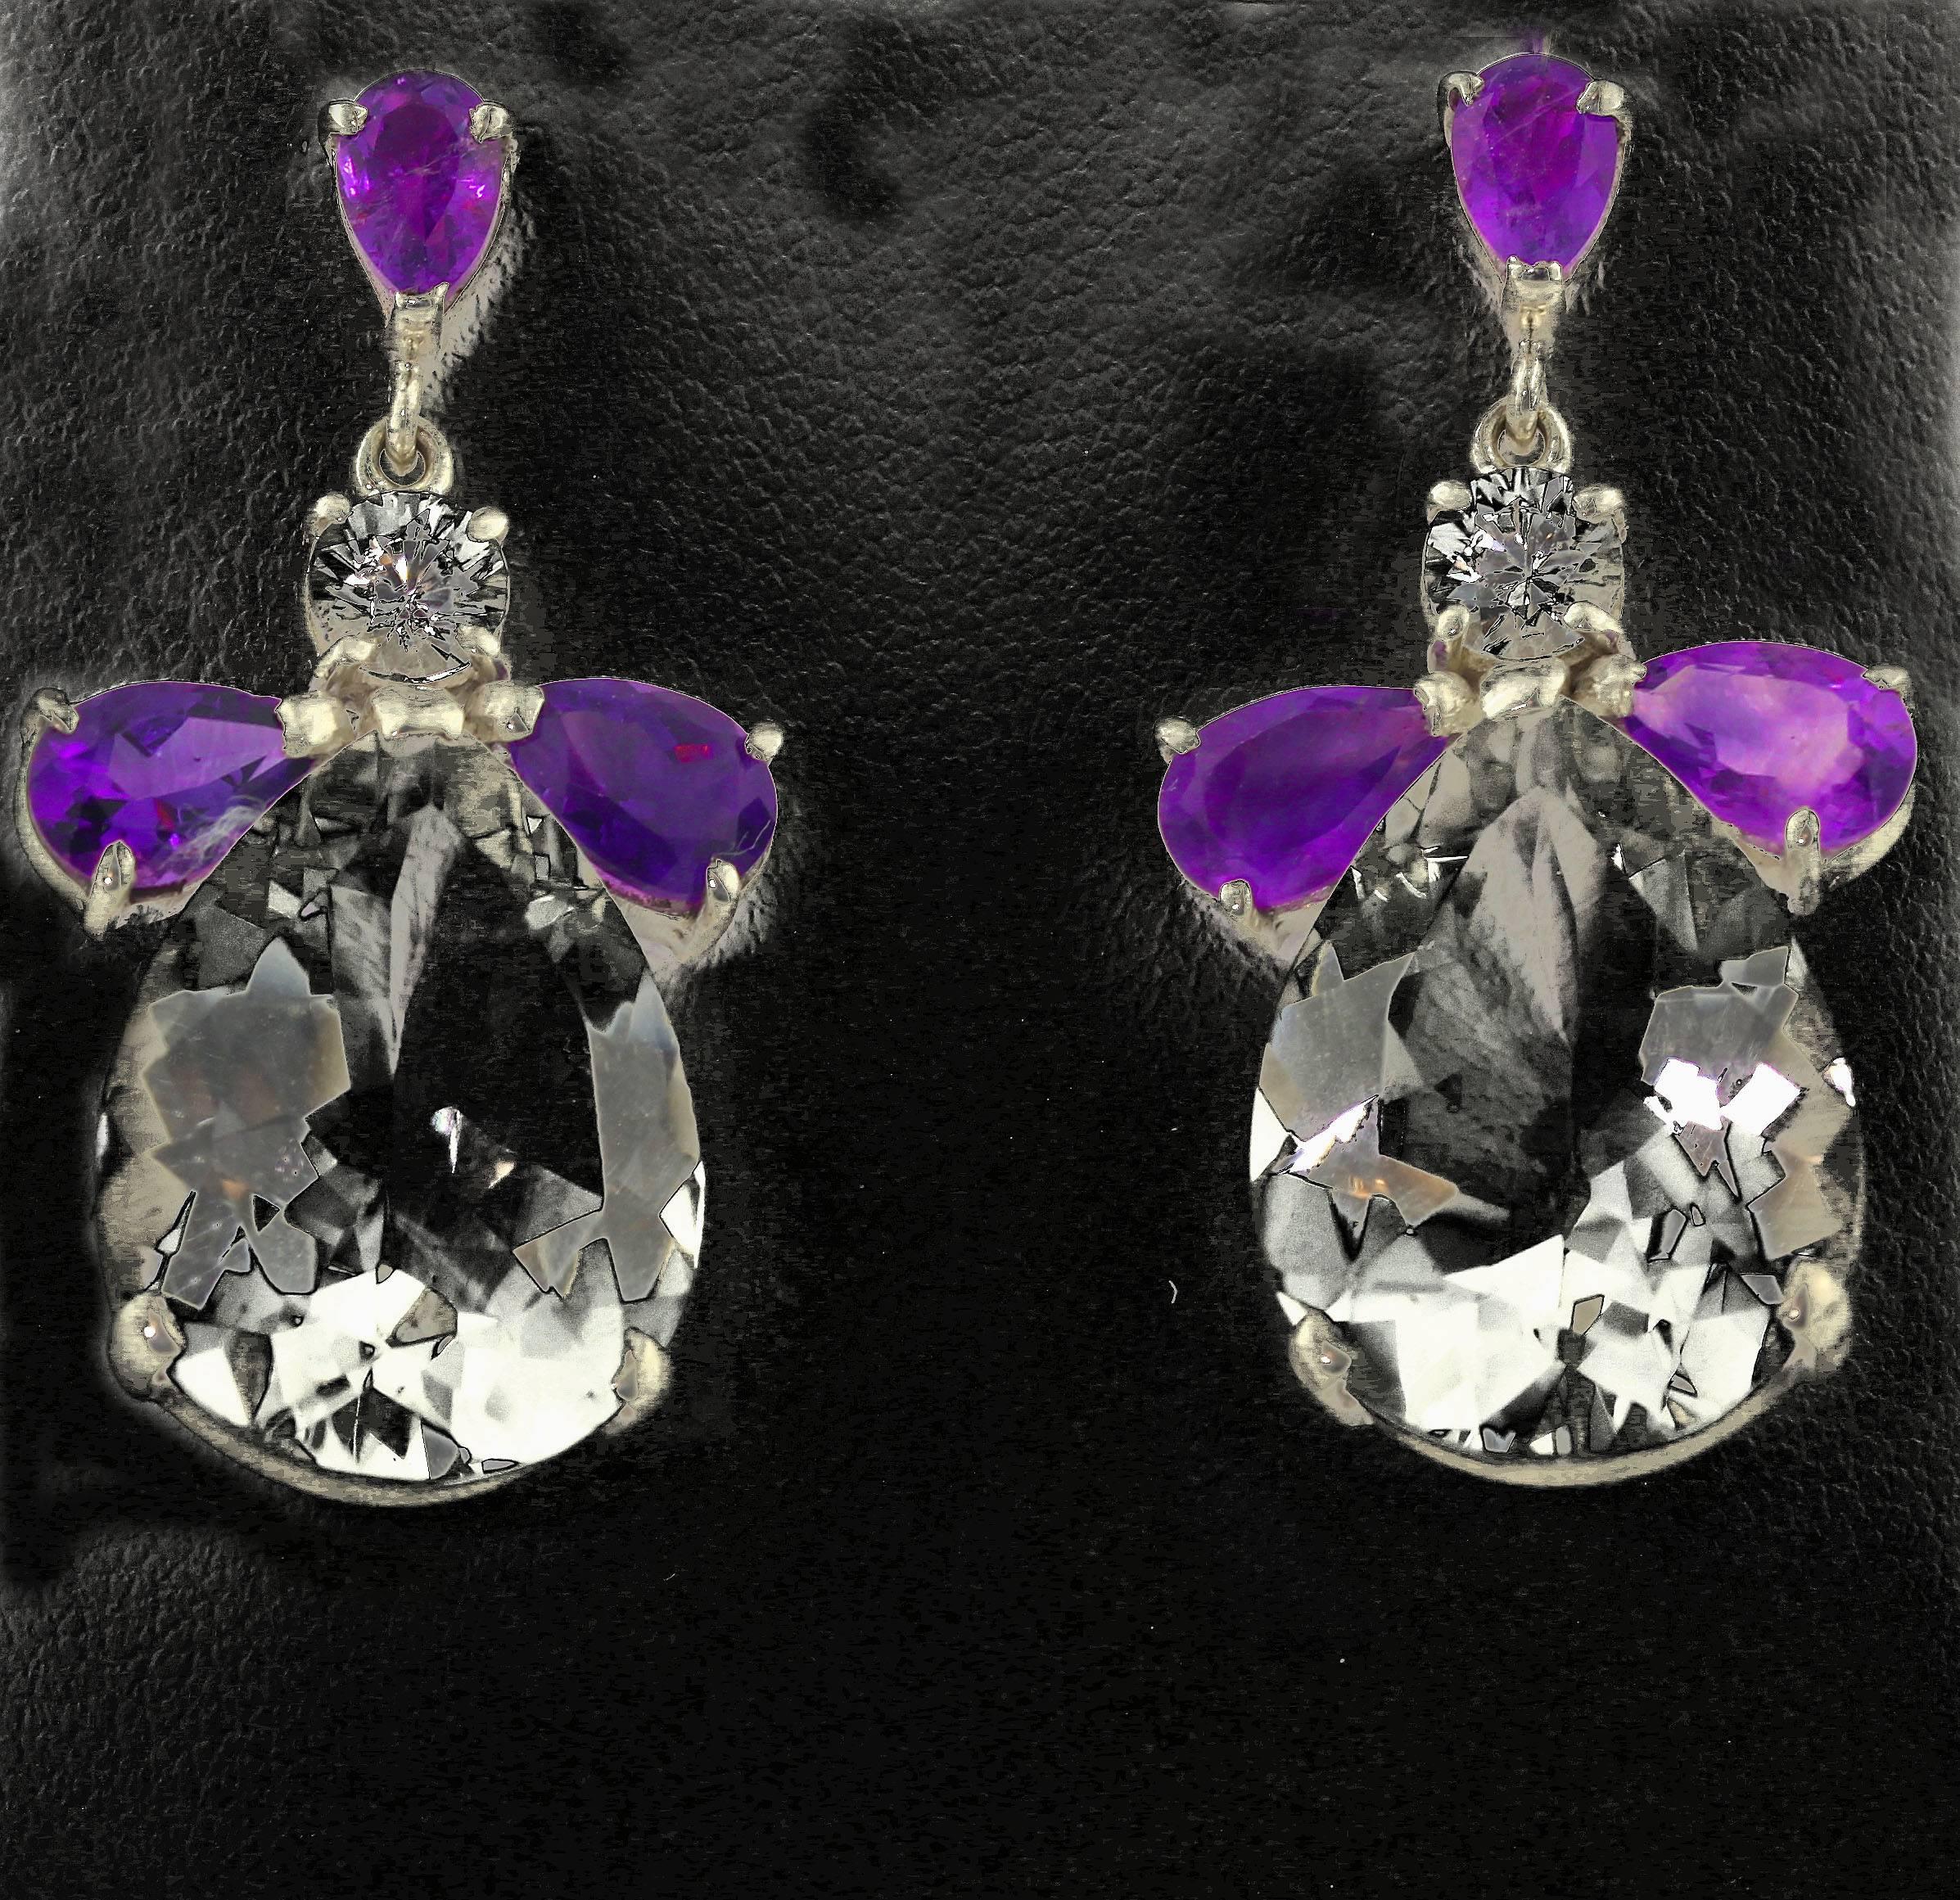 Brilliant pear cut Amethysts show off these lovely round Sapphires (5 mm) dangling with 17 carats (20.7 mm x 15 mm) of glittering white silvery translucent pear cut Quartz set in sterling silver stud earrings. They hang approximately 1.43 inches.